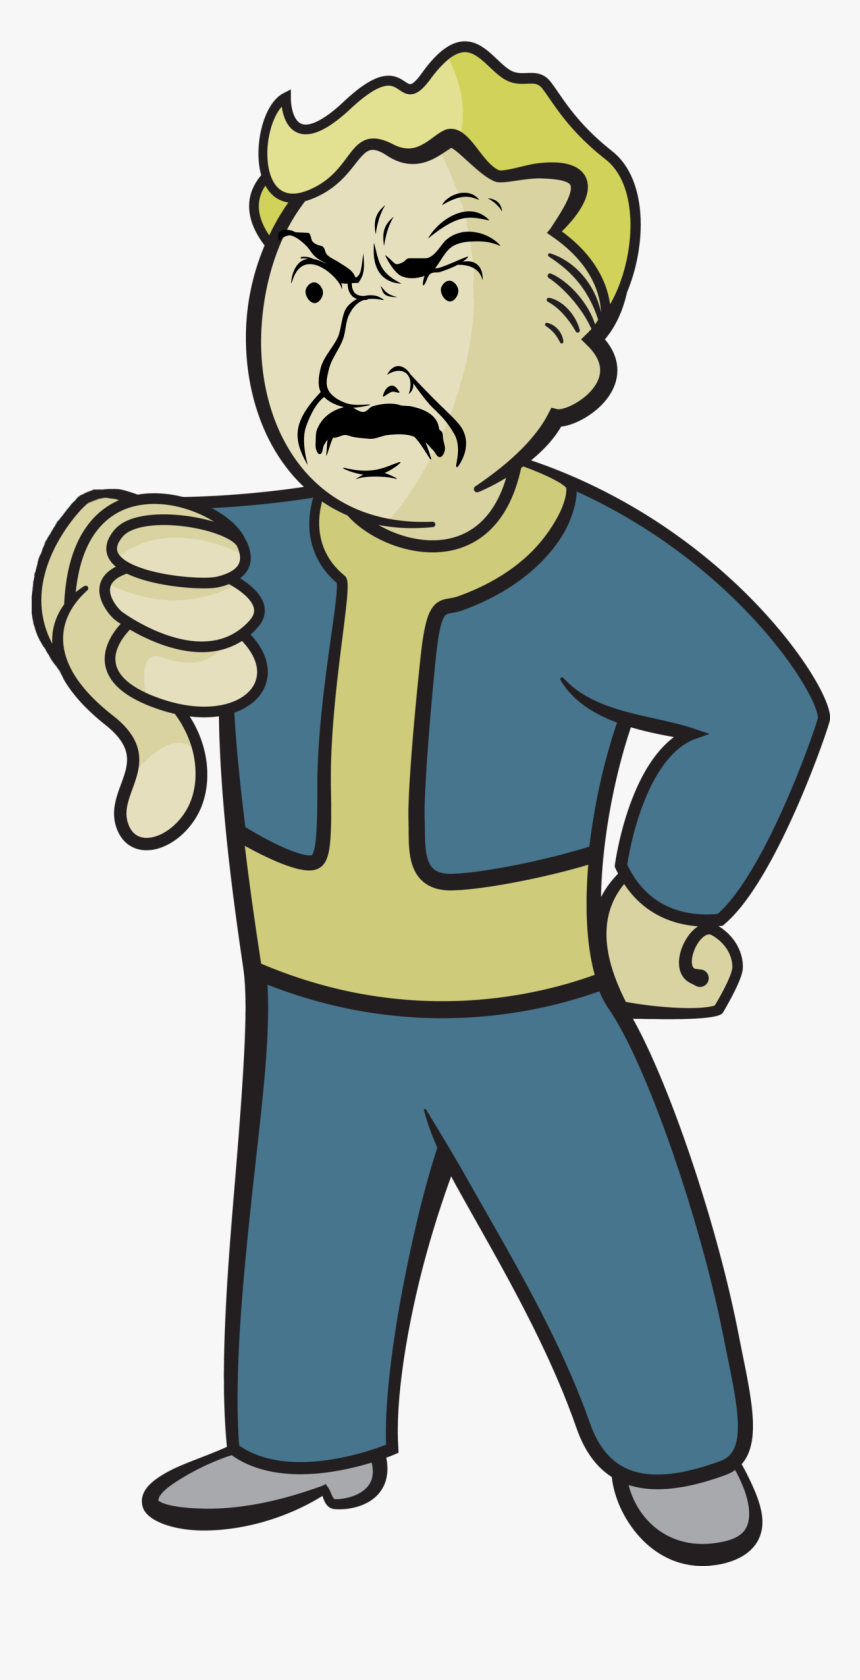 Fallout 4 Minecraft Standing Male Human Behavior Clip - Vault Boy Thumbs Up Transparent, HD Png Download, Free Download